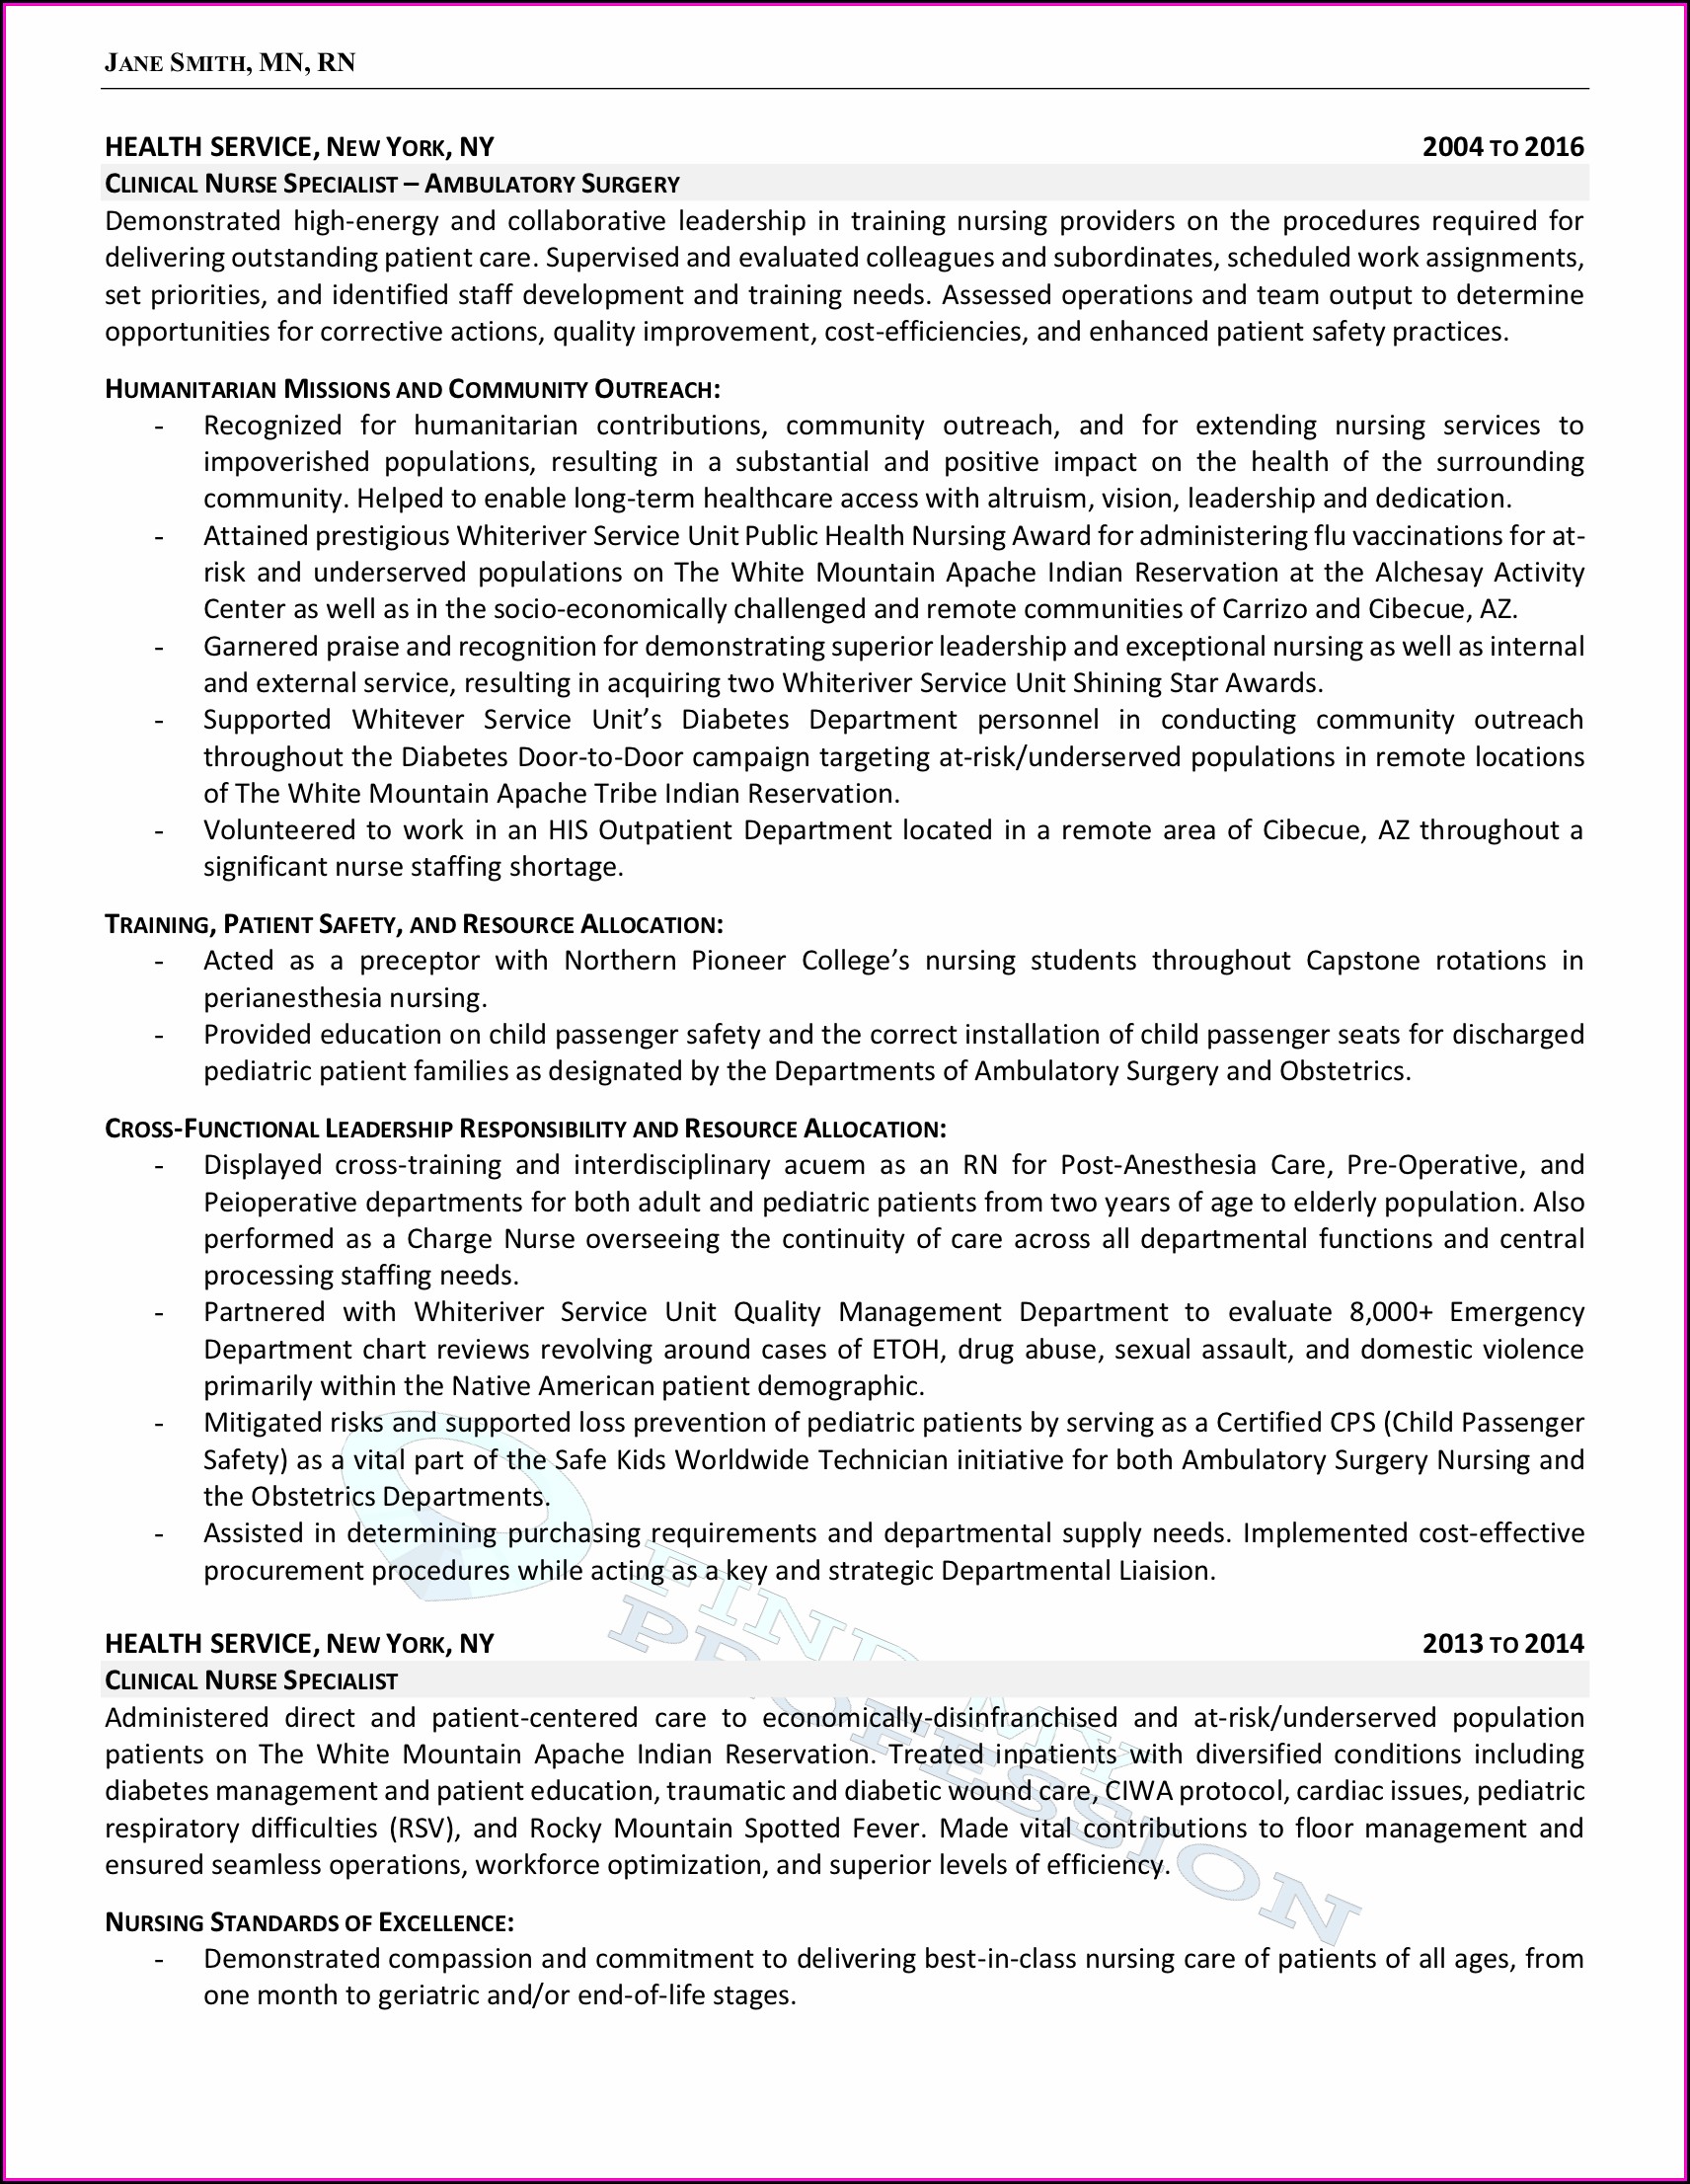 Resume writing service - How To Be More Productive?